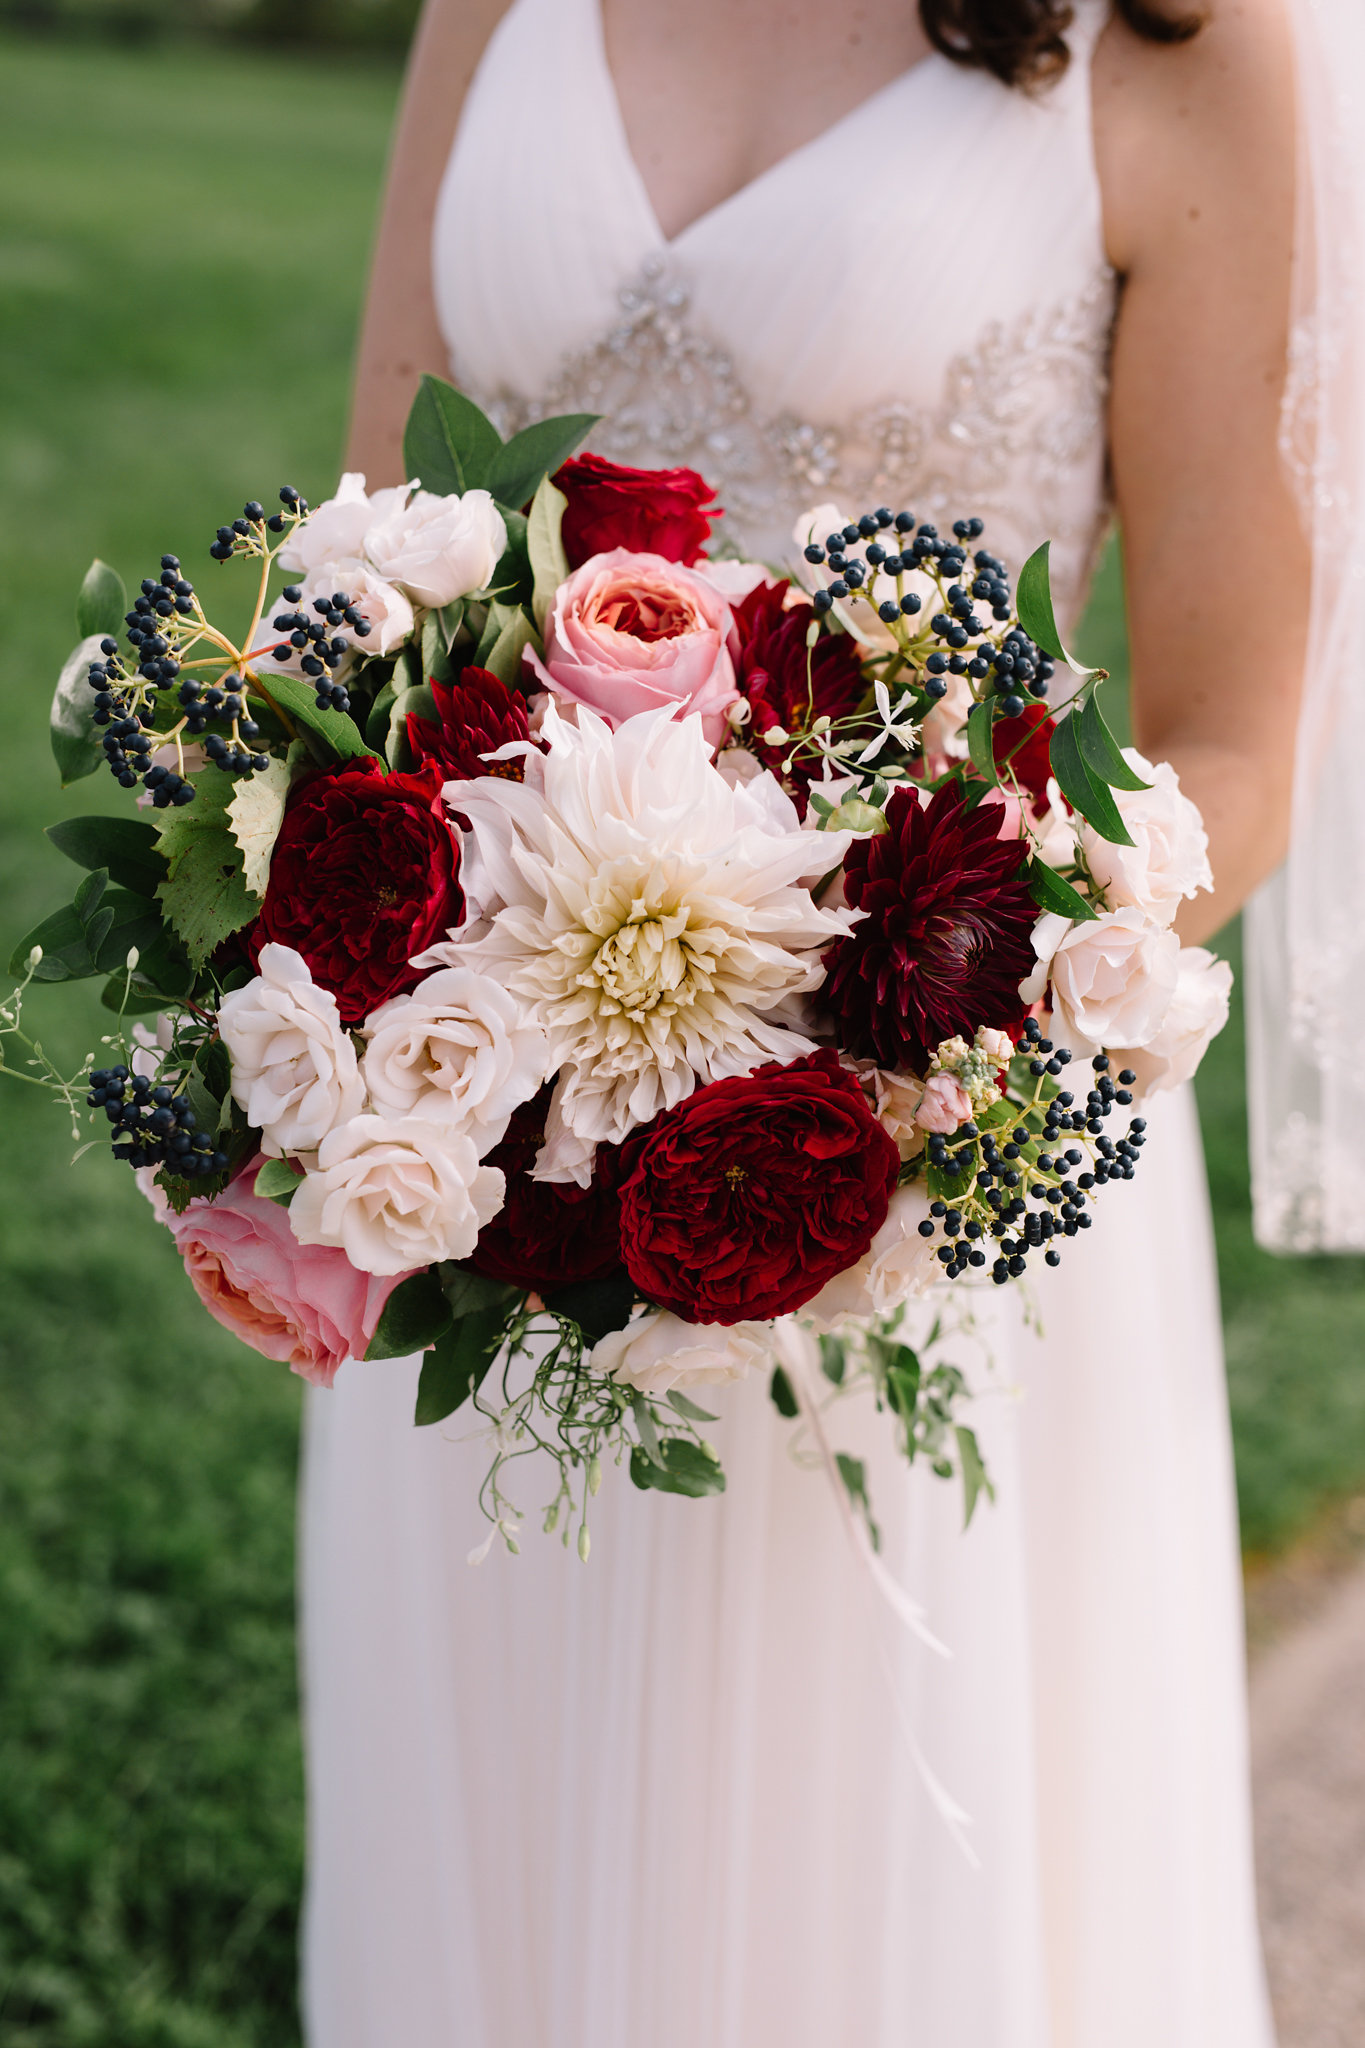 bride holding bouquet with dahlias, garden roses, berries, vines in red, coral, peach, blush